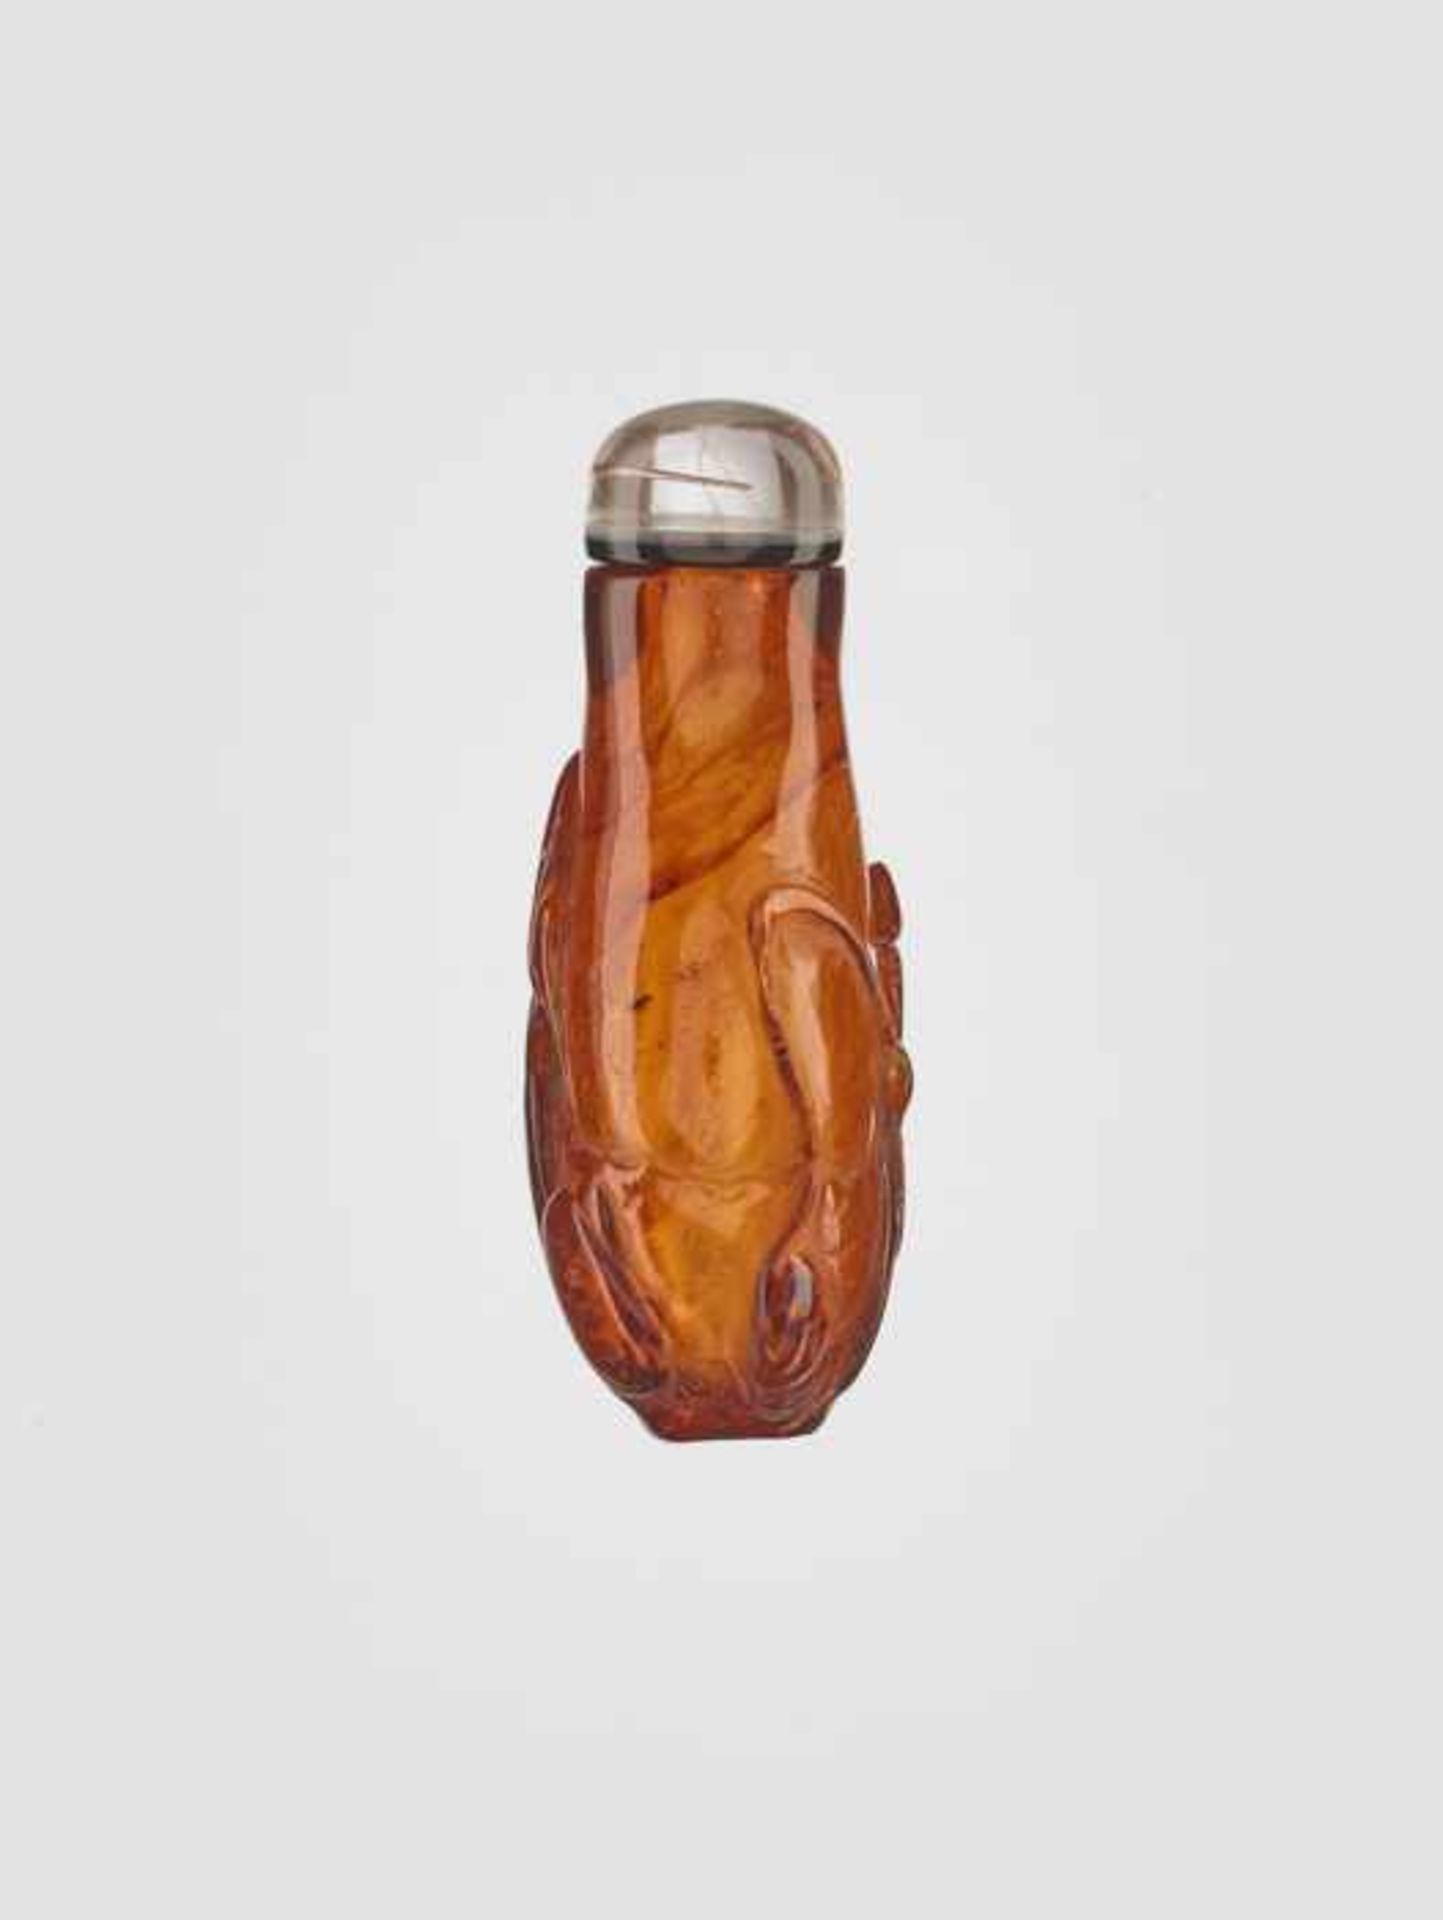 A MINIATURE AMBER ‘FISHERMAN’ SNUFF BOTTLE, EARLY 19th CENTURY Transparent amber of untreated - Image 4 of 6